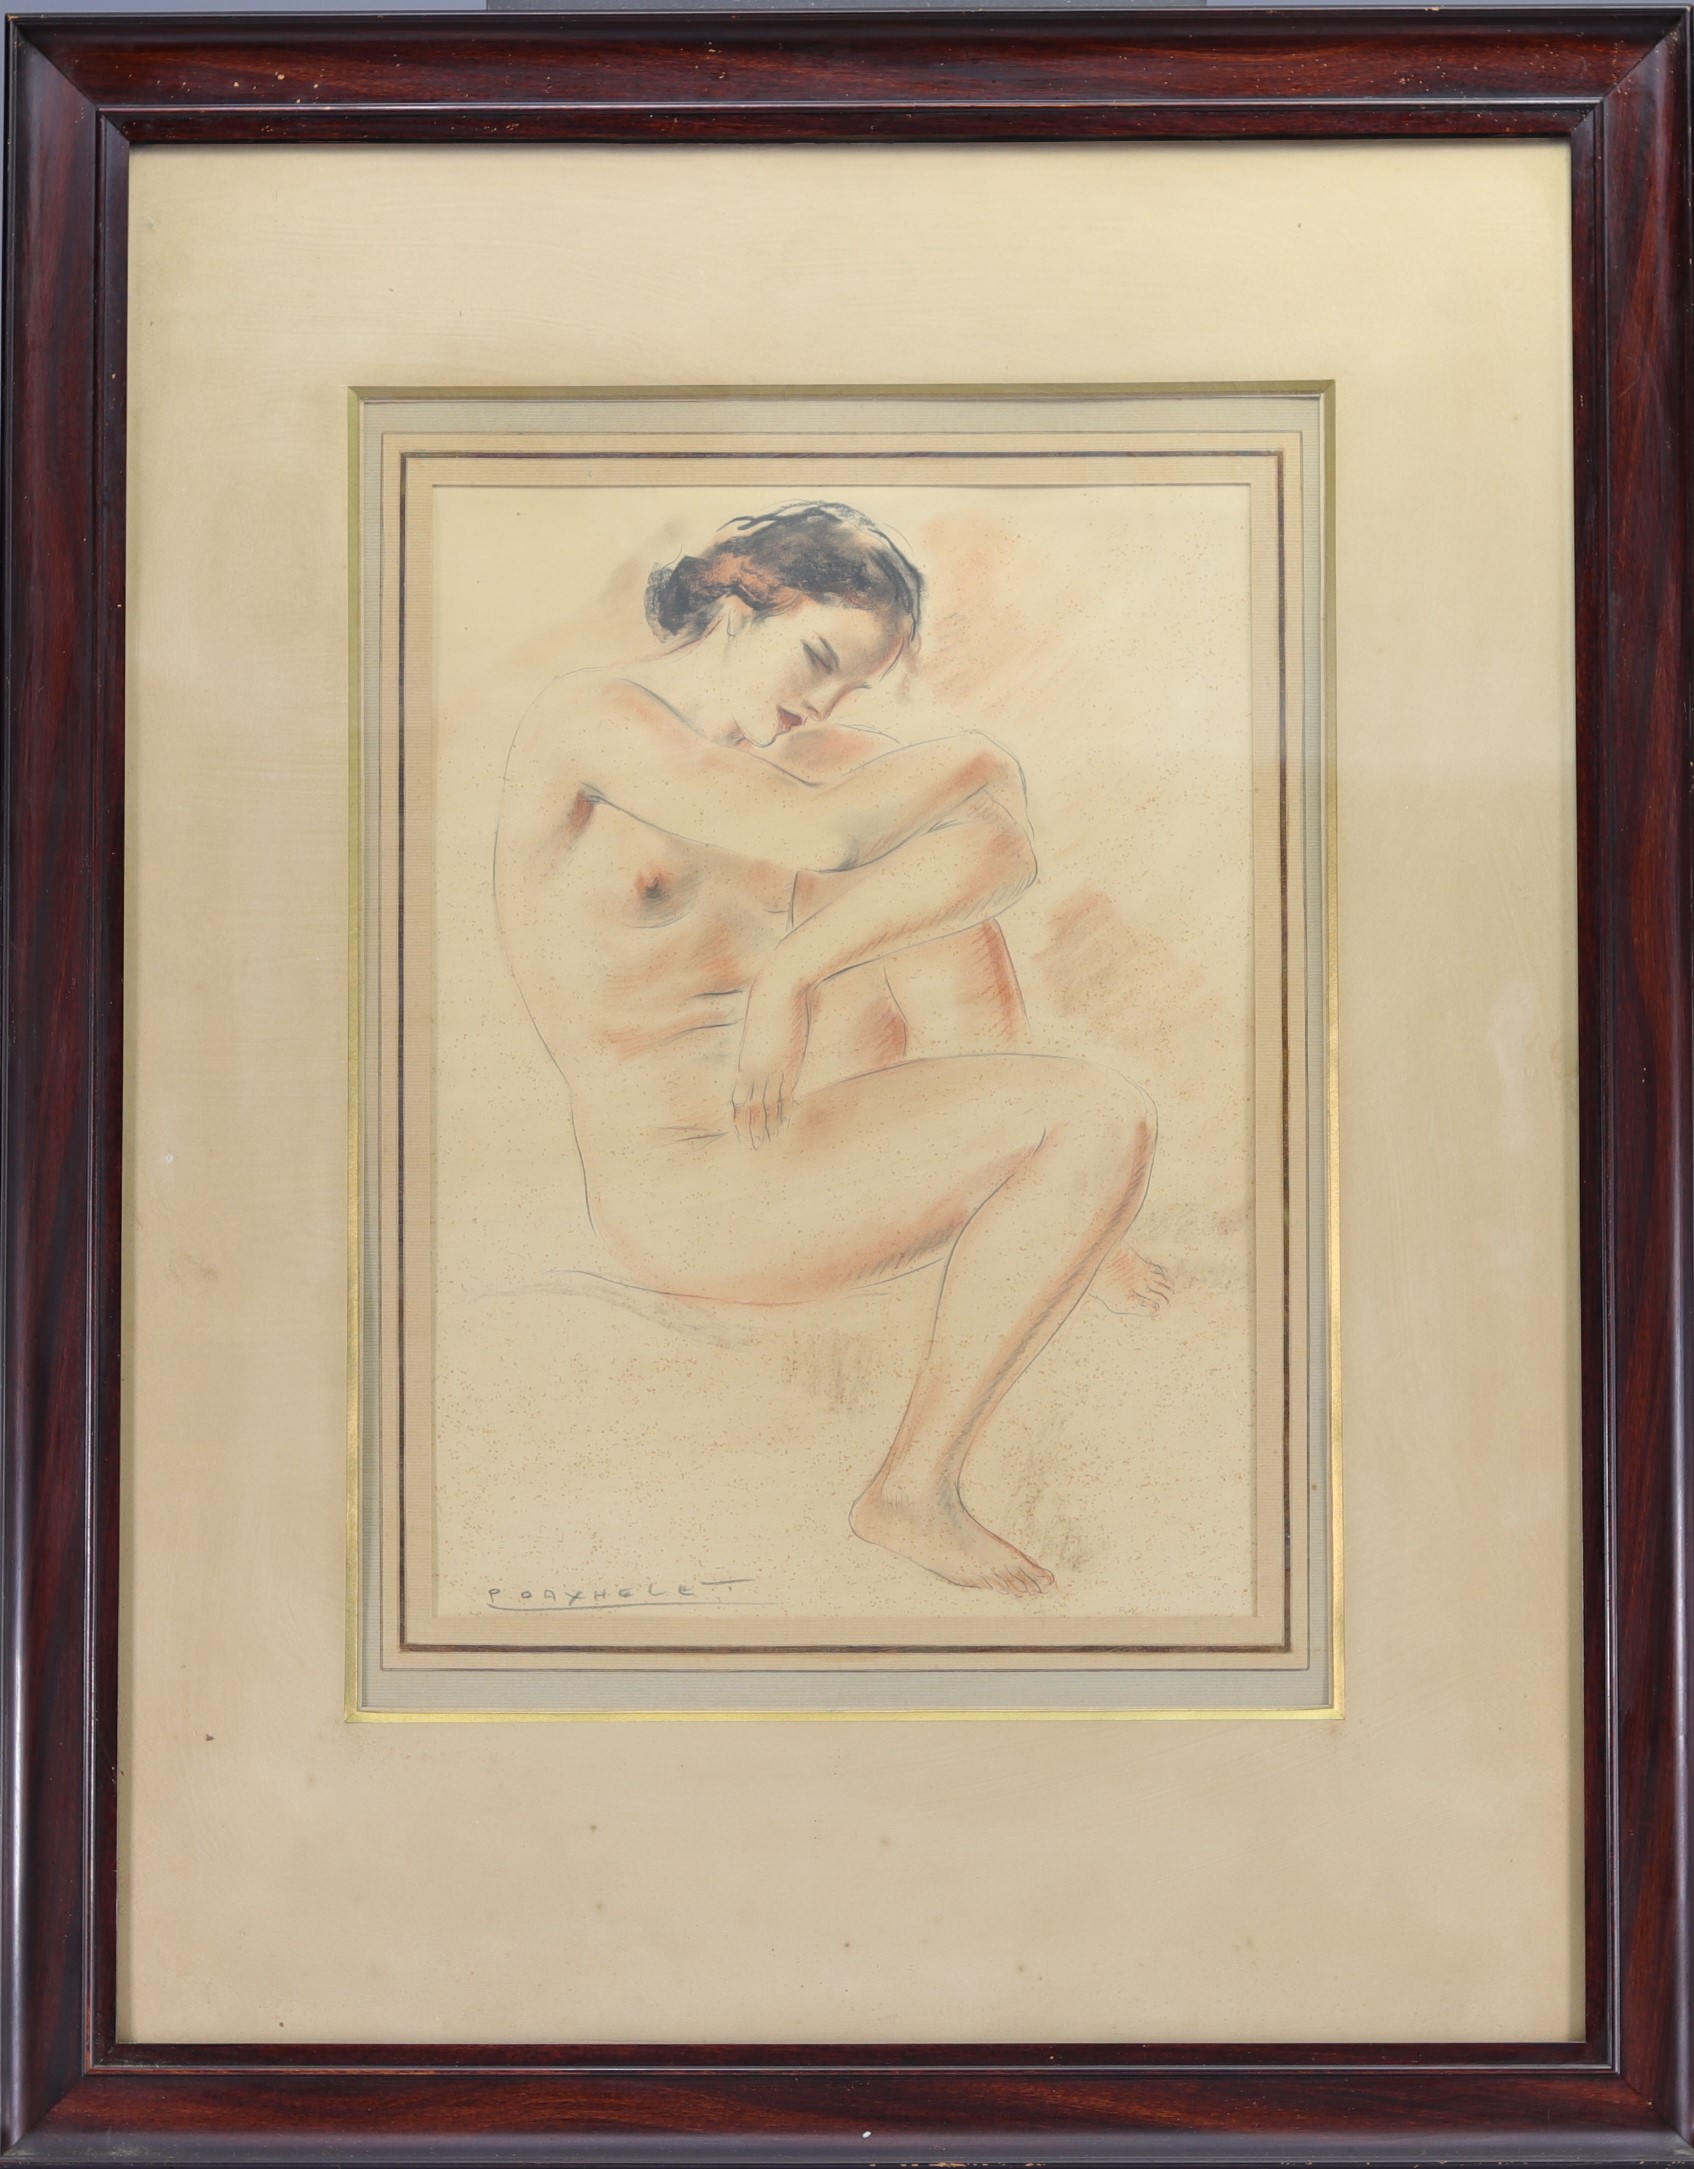 Paul DAXHELET (1905-1993) "Young woman naked" Pencil and charcoal drawing. - Image 2 of 3